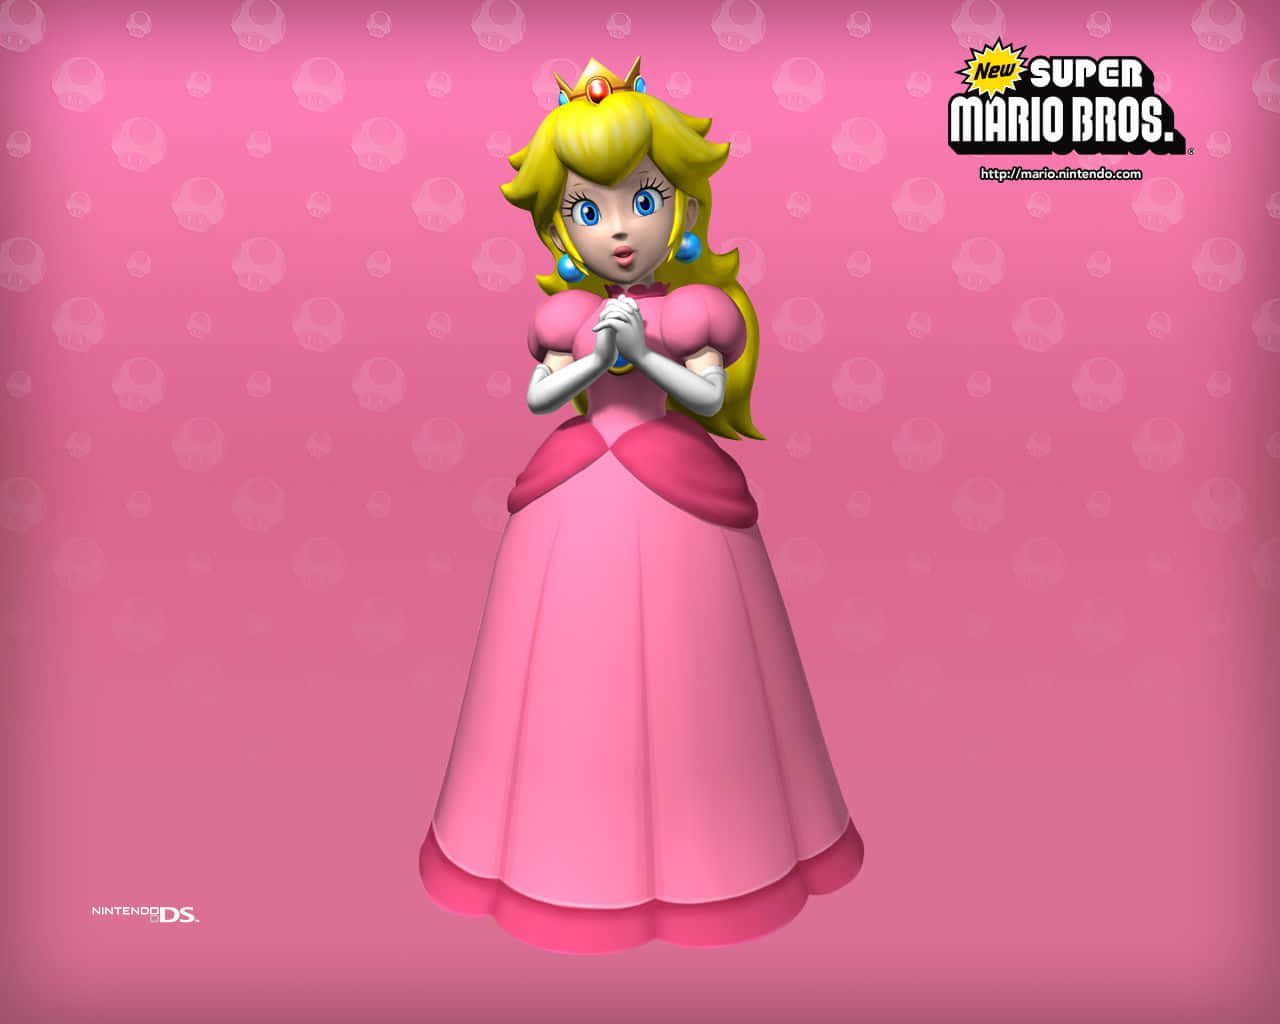 Let's go on an adventure with Princess Peach! Wallpaper